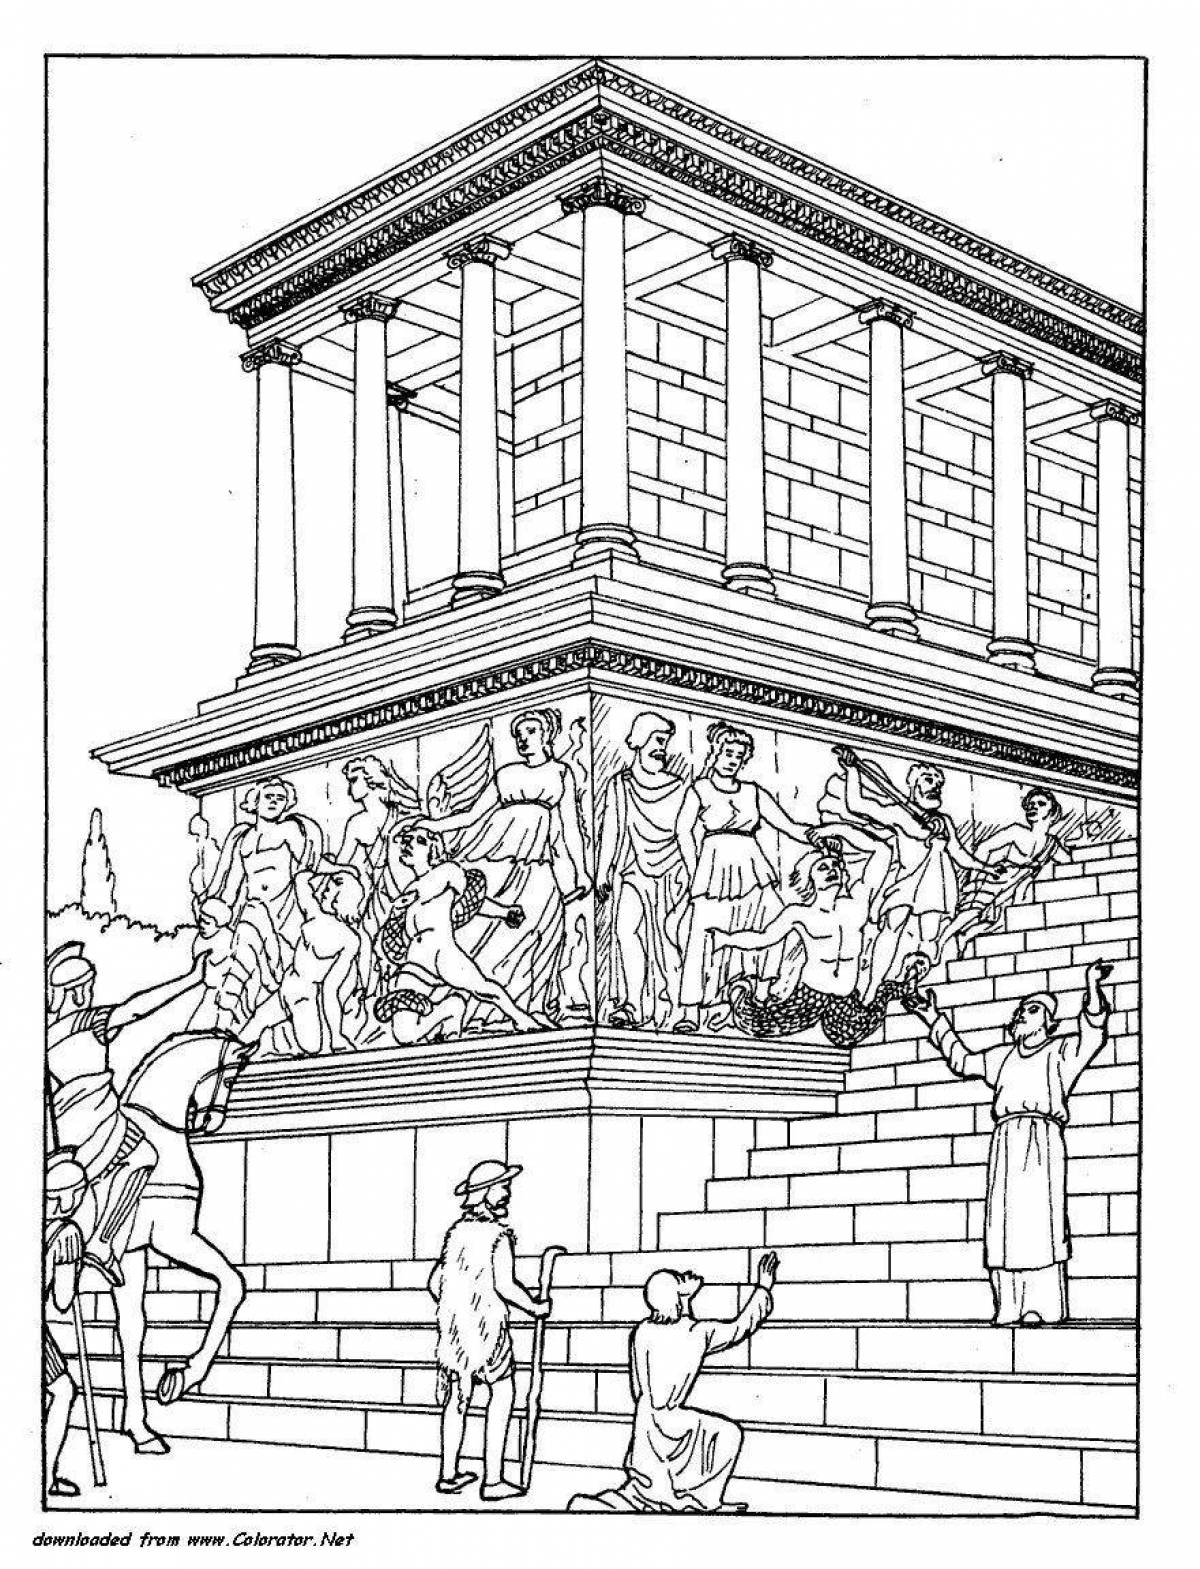 Coloring page charming greece